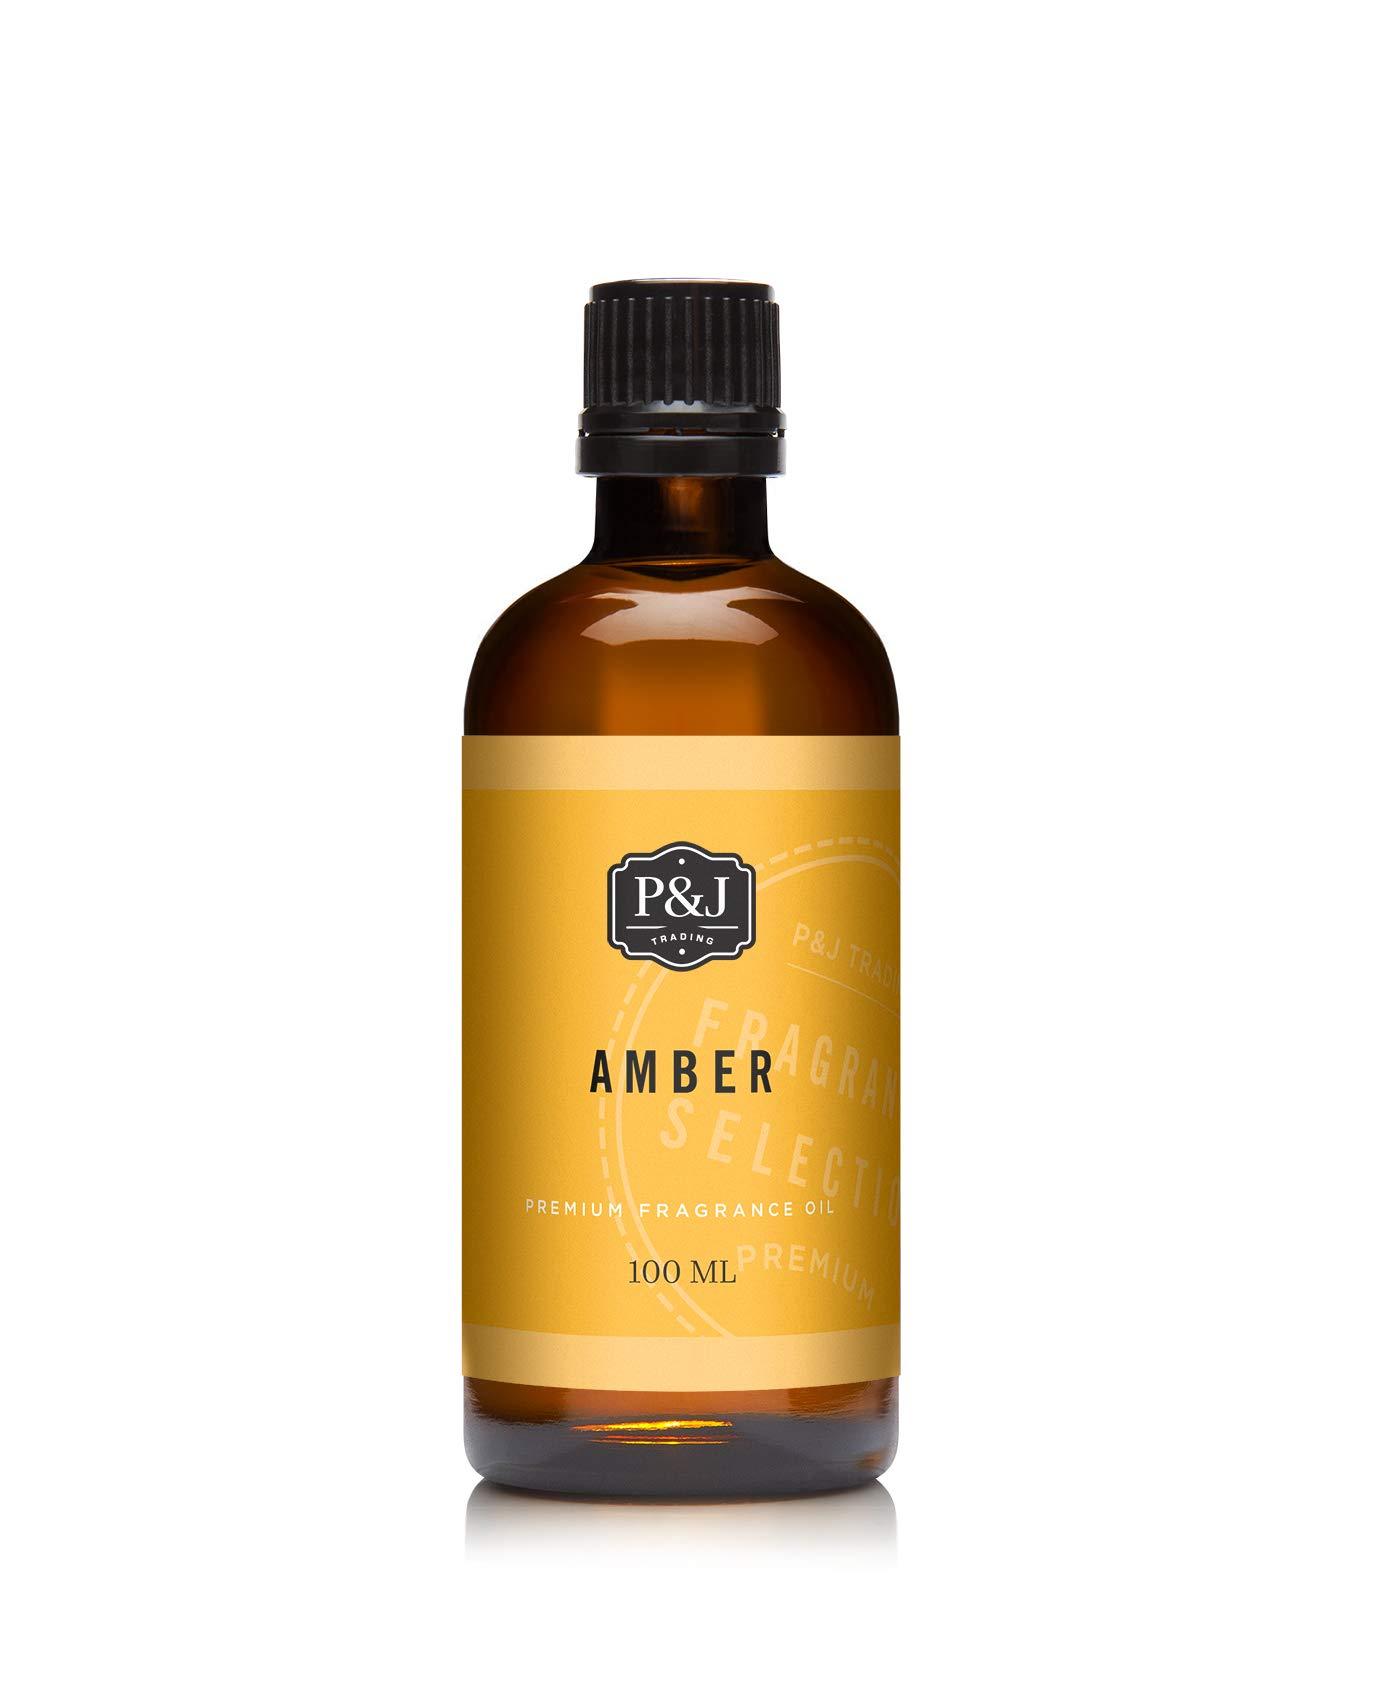 P&J Trading Amber Fragrance Oil for Candle Making Soap Making Slime  Diffusers Home and Crafts - 100ml